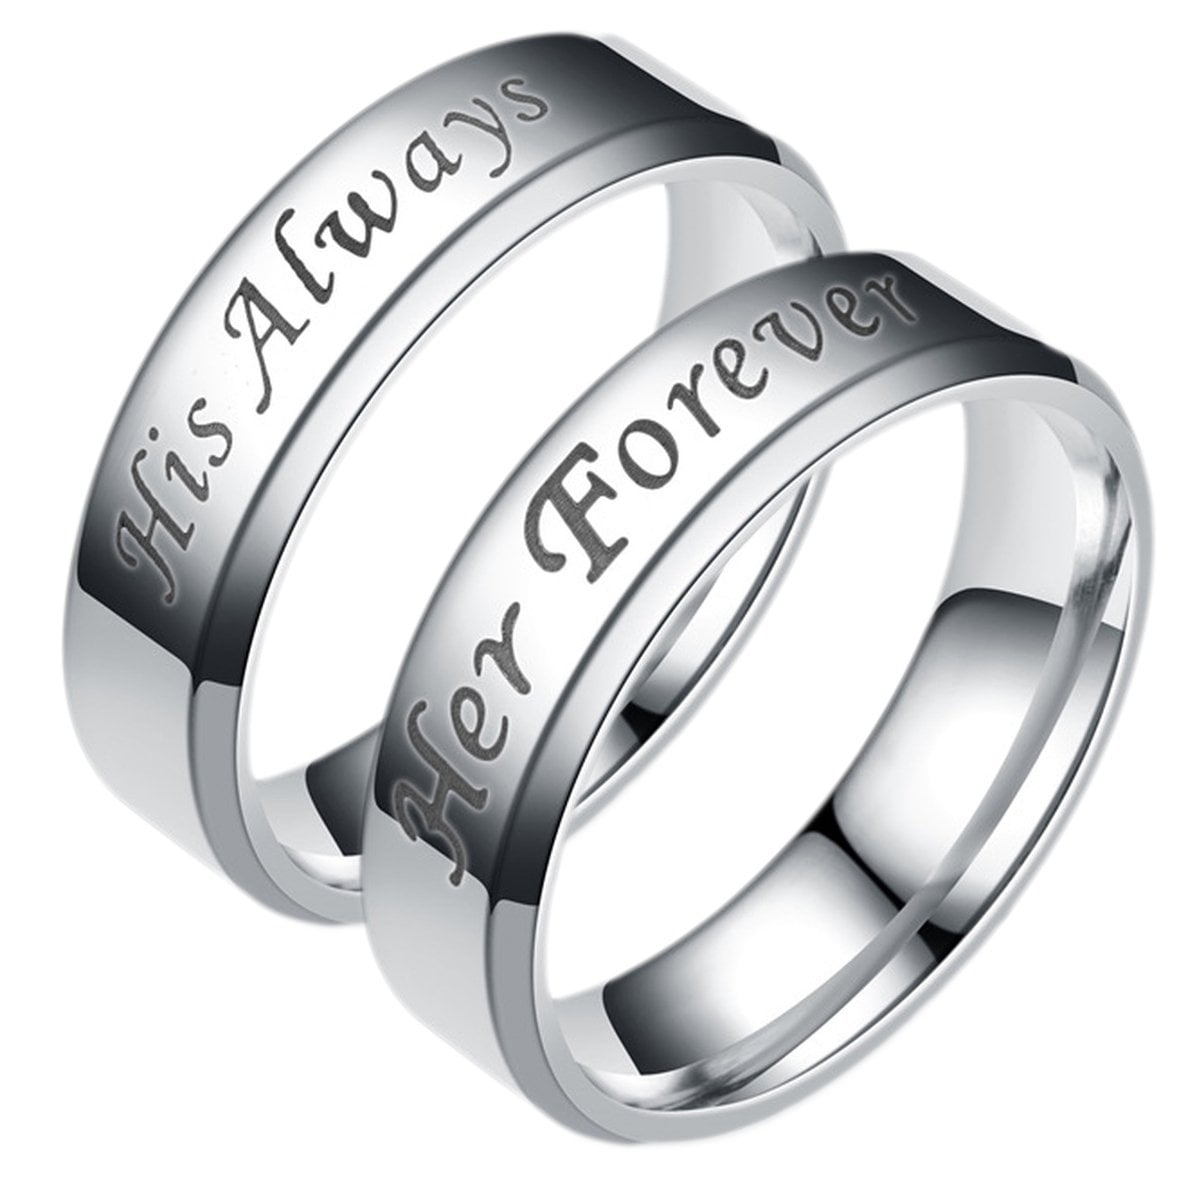 Stainless Steel 316L Silver Polished Arrow Rainbow Ring and Band 